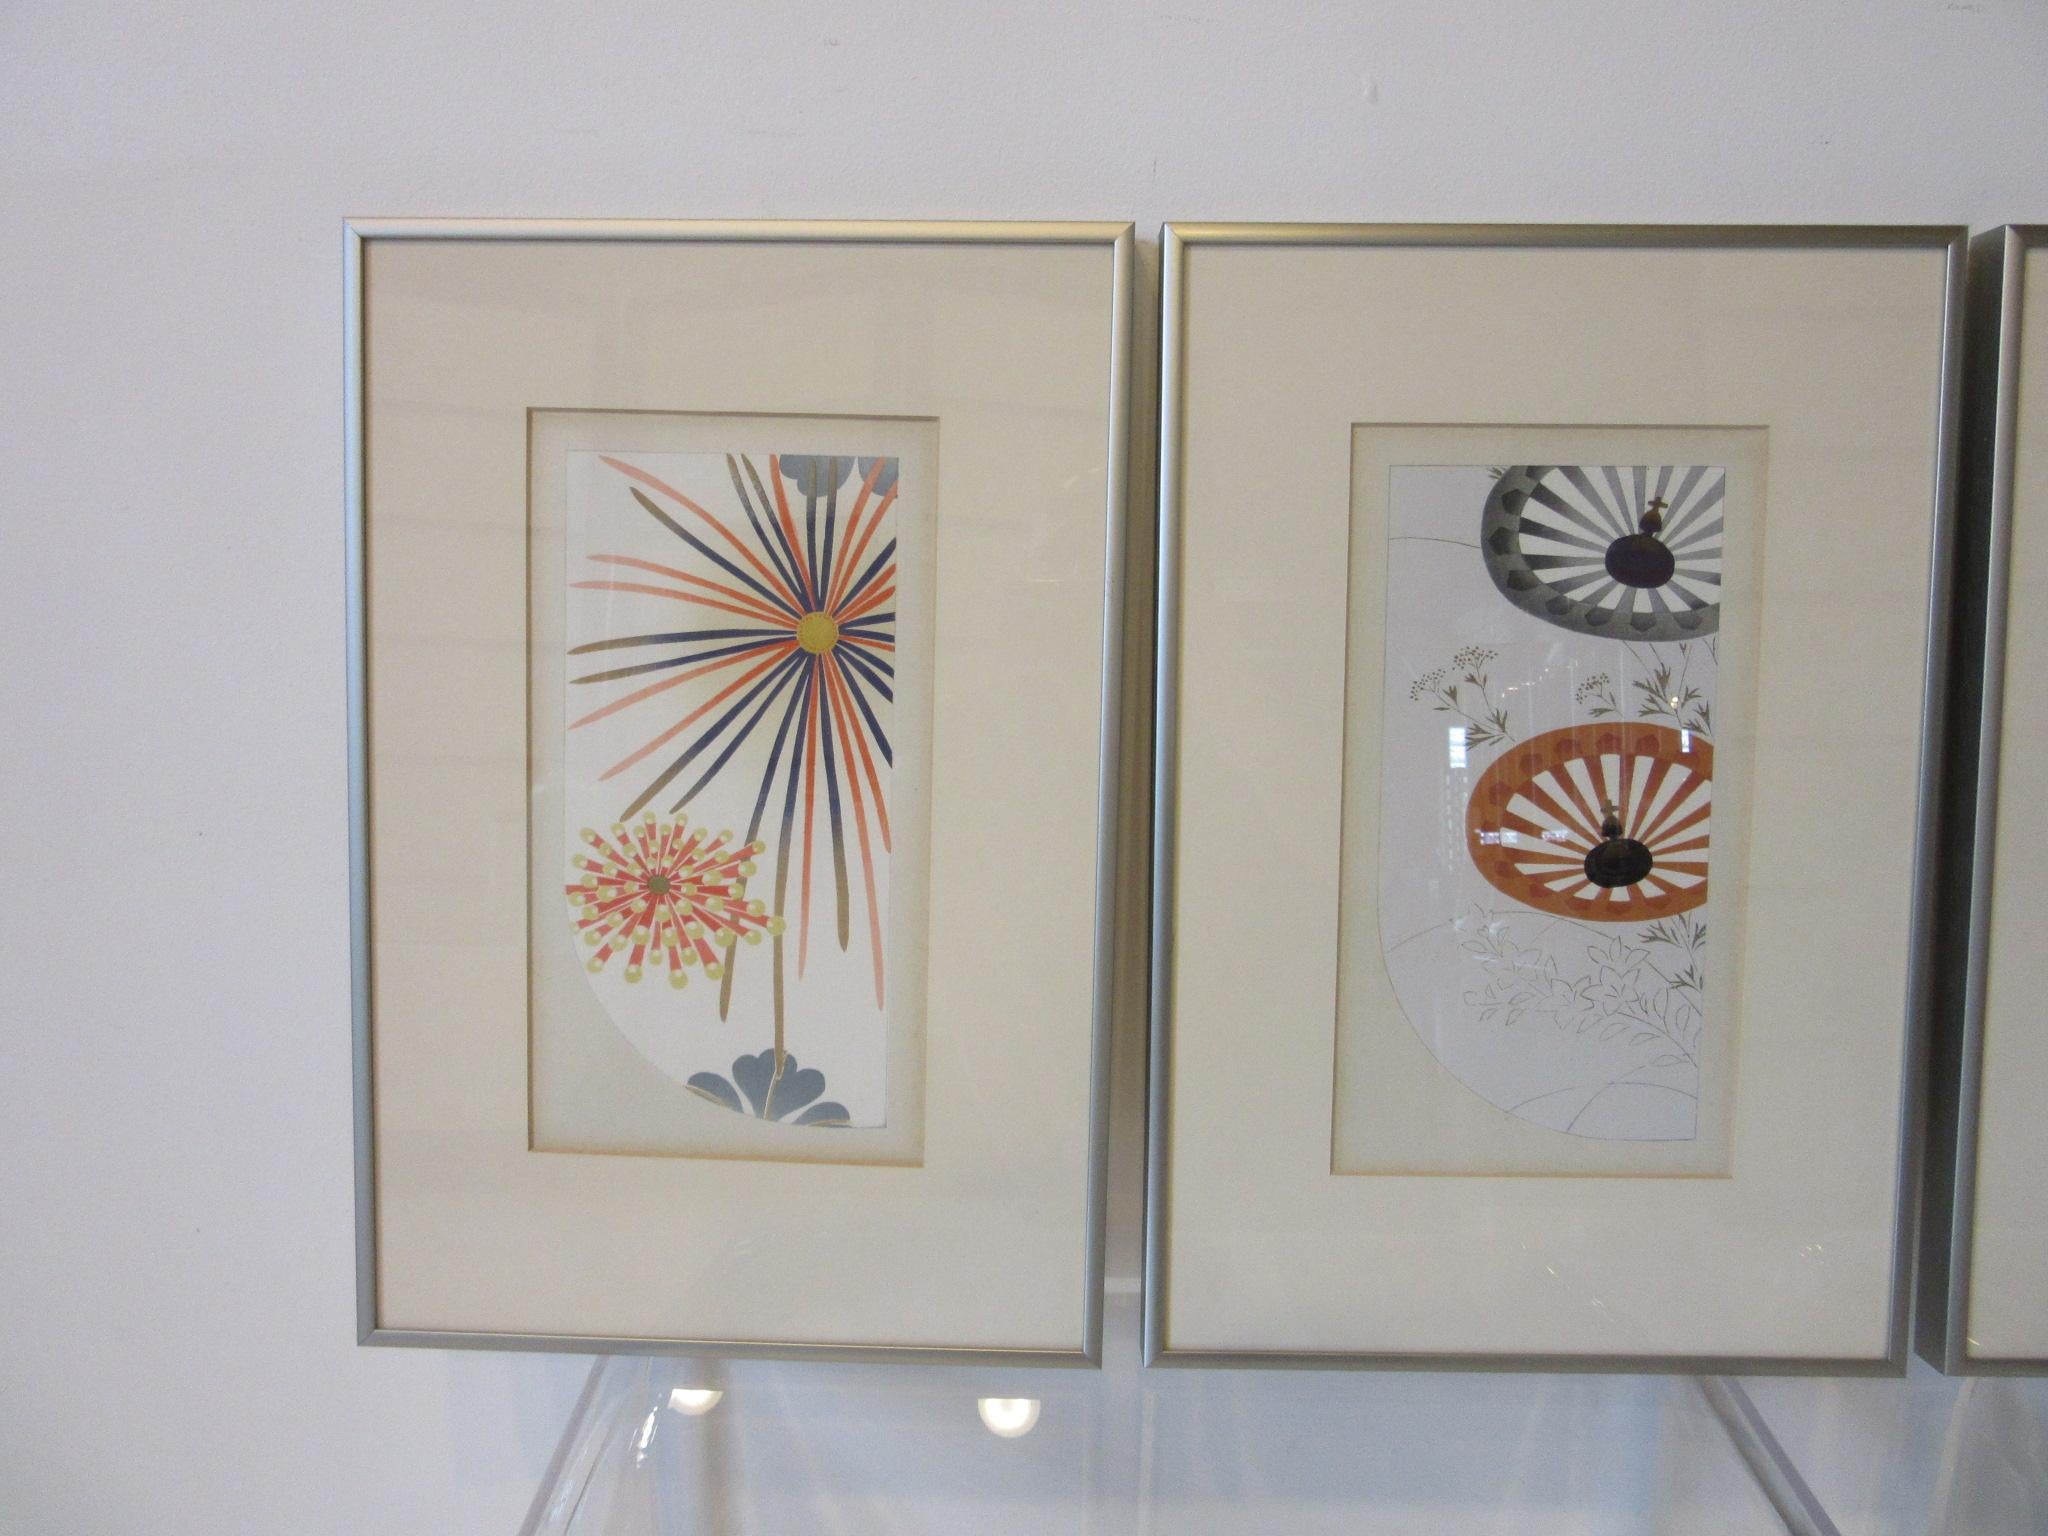 A wonderful collection of four framed hand colored wood block prints with Art Deco influenced styling possibly for a Kimono design. This set of original prints were crafted by Jun Hisatomi and Tamaki Yoshida.